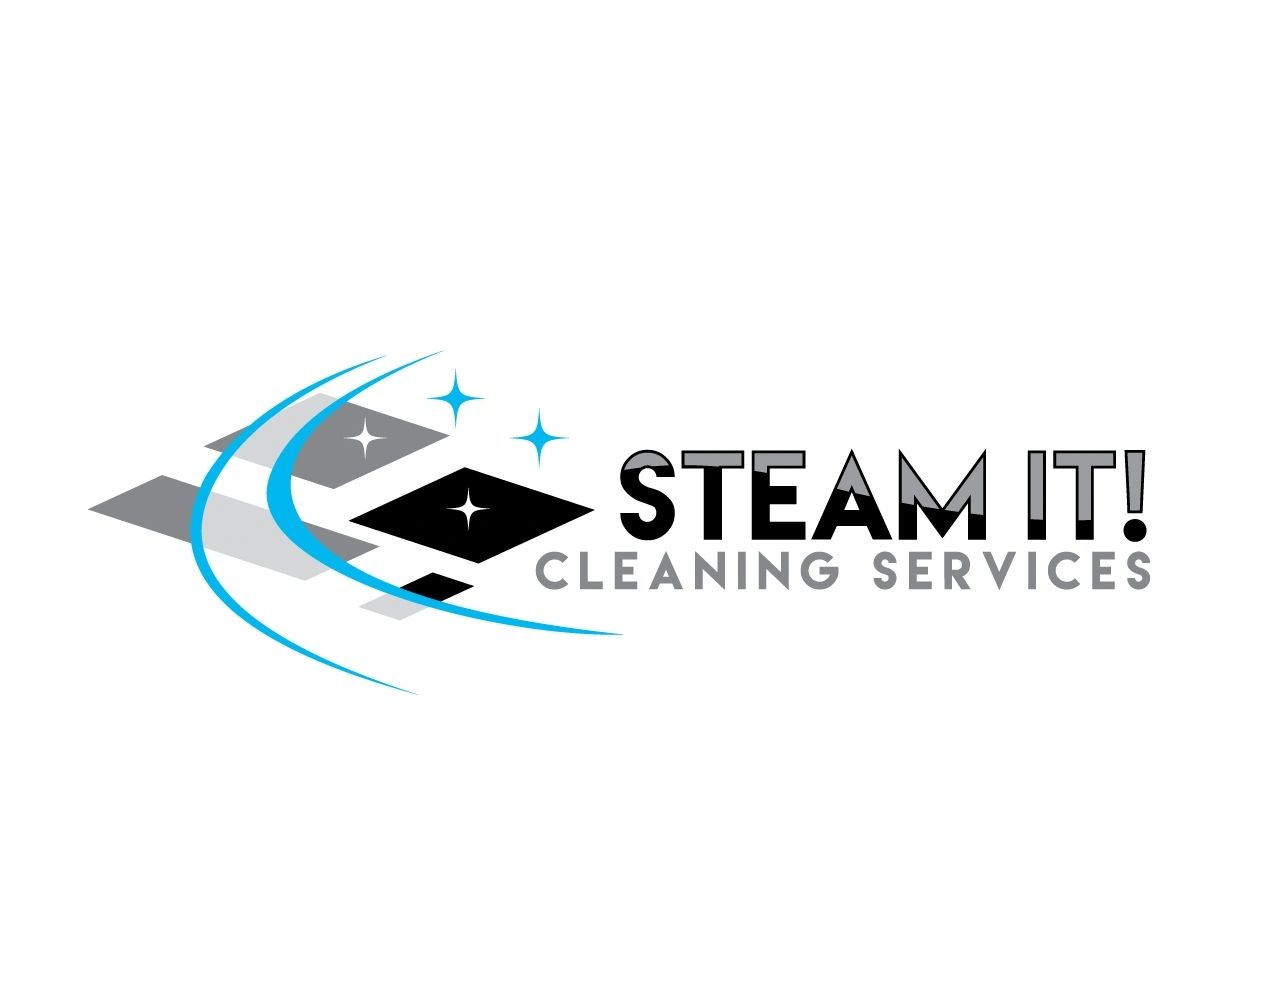 Carpet cleaning, tile cleaning, steam cleaning, upholstery cleaning, sofa cleaning, local